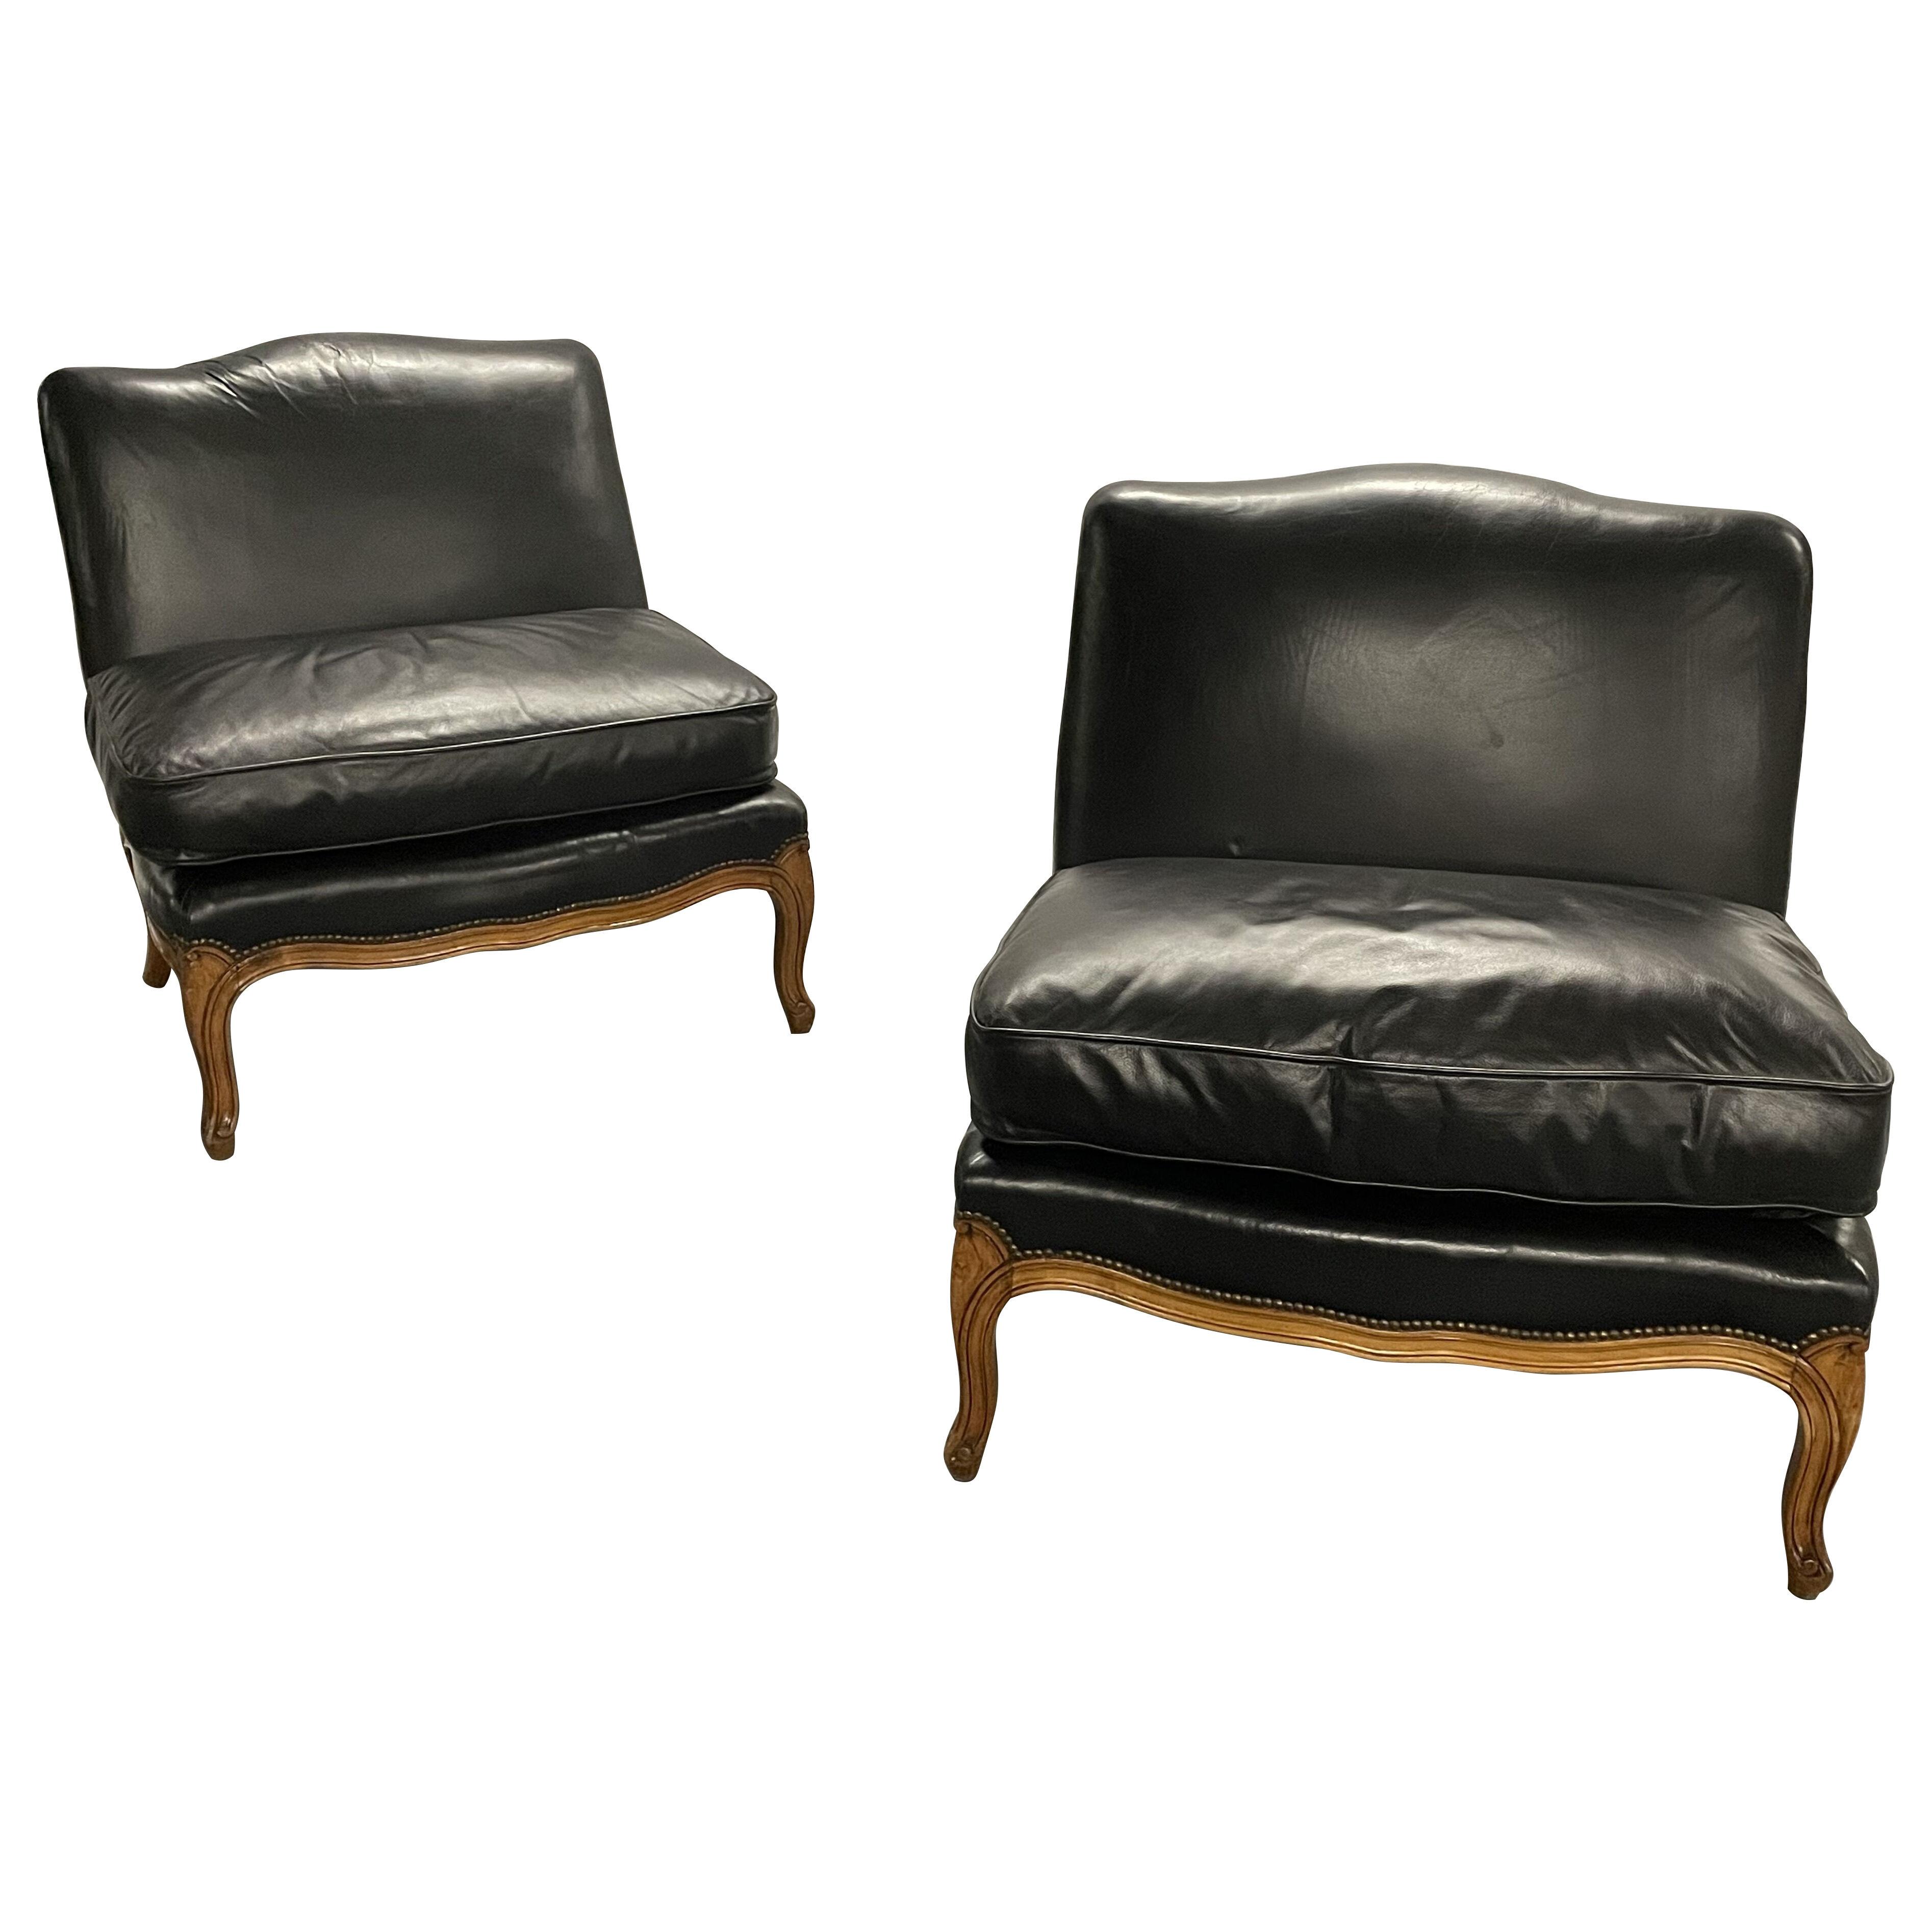 Pair of Leather Louis XV Style Marquise, Side or Lounge Chairs